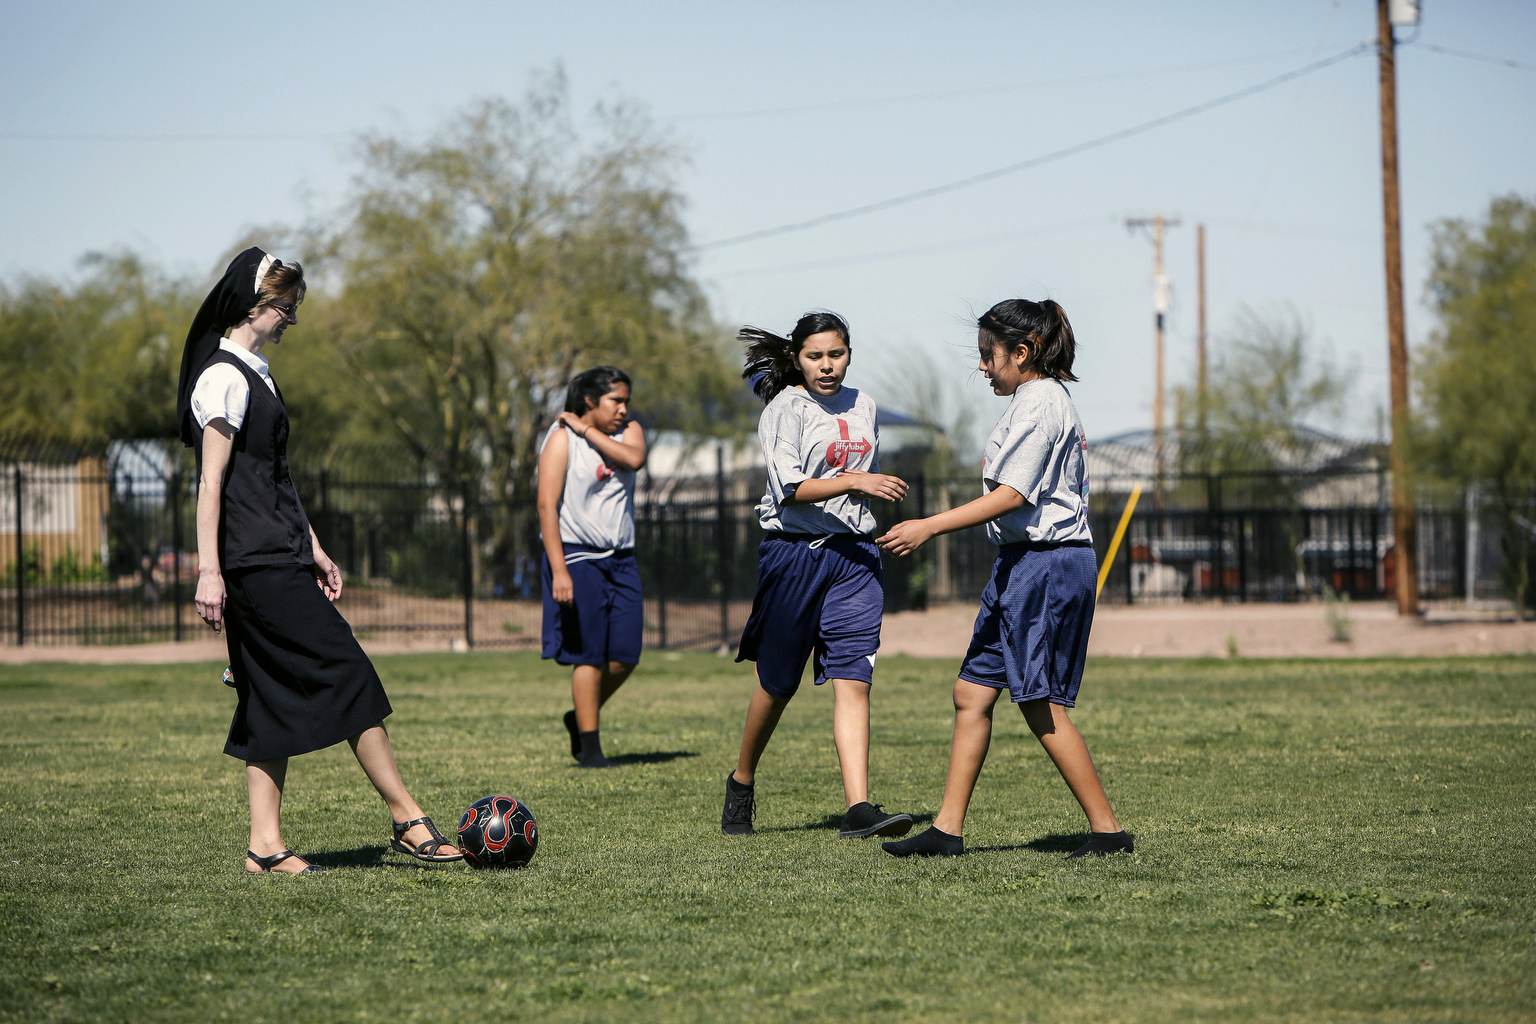 Sr. Pamela Catherine Peasel takes to the soccer field with her junior high school girls at St. Peter Indian Mission School in Bapchule, Ariz. Franciscan Sisters of Christian Charity have served the Gila River Indian Community since 1935. (CNS photo/Nancy Wiechec)